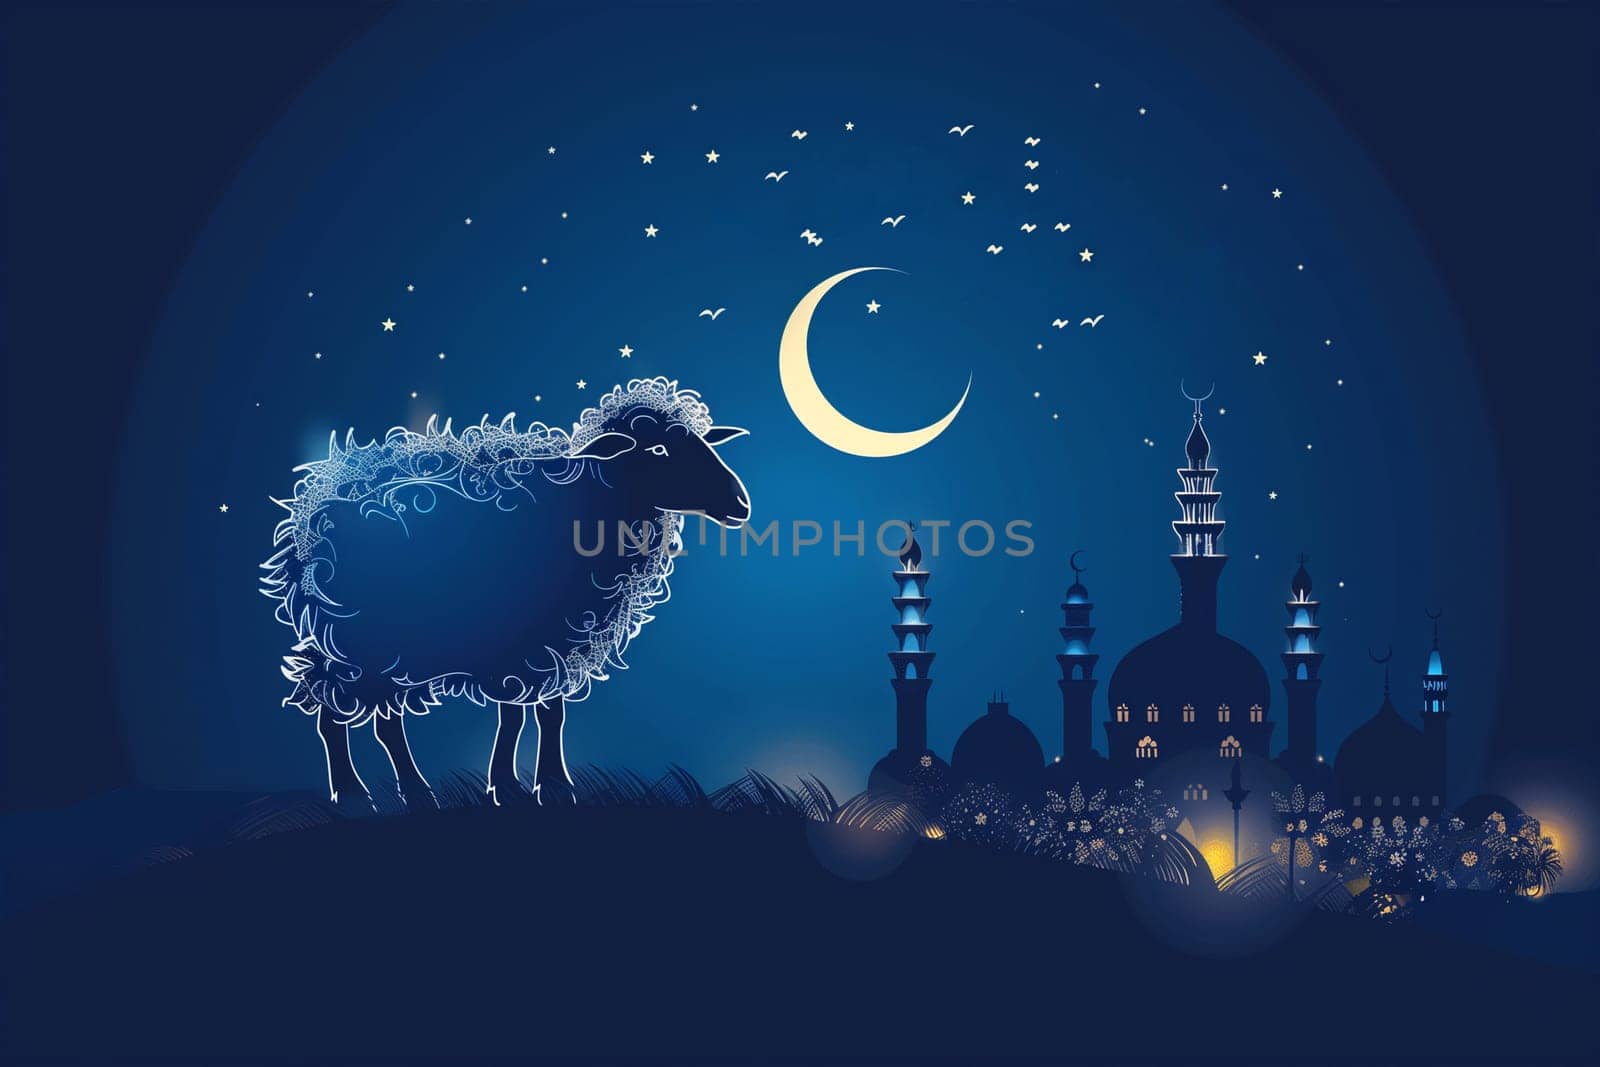 A stylized silhouette of a sheep stands before a mosque under a night sky, illuminated by a crescent moon and stars during Kurban Bayram.